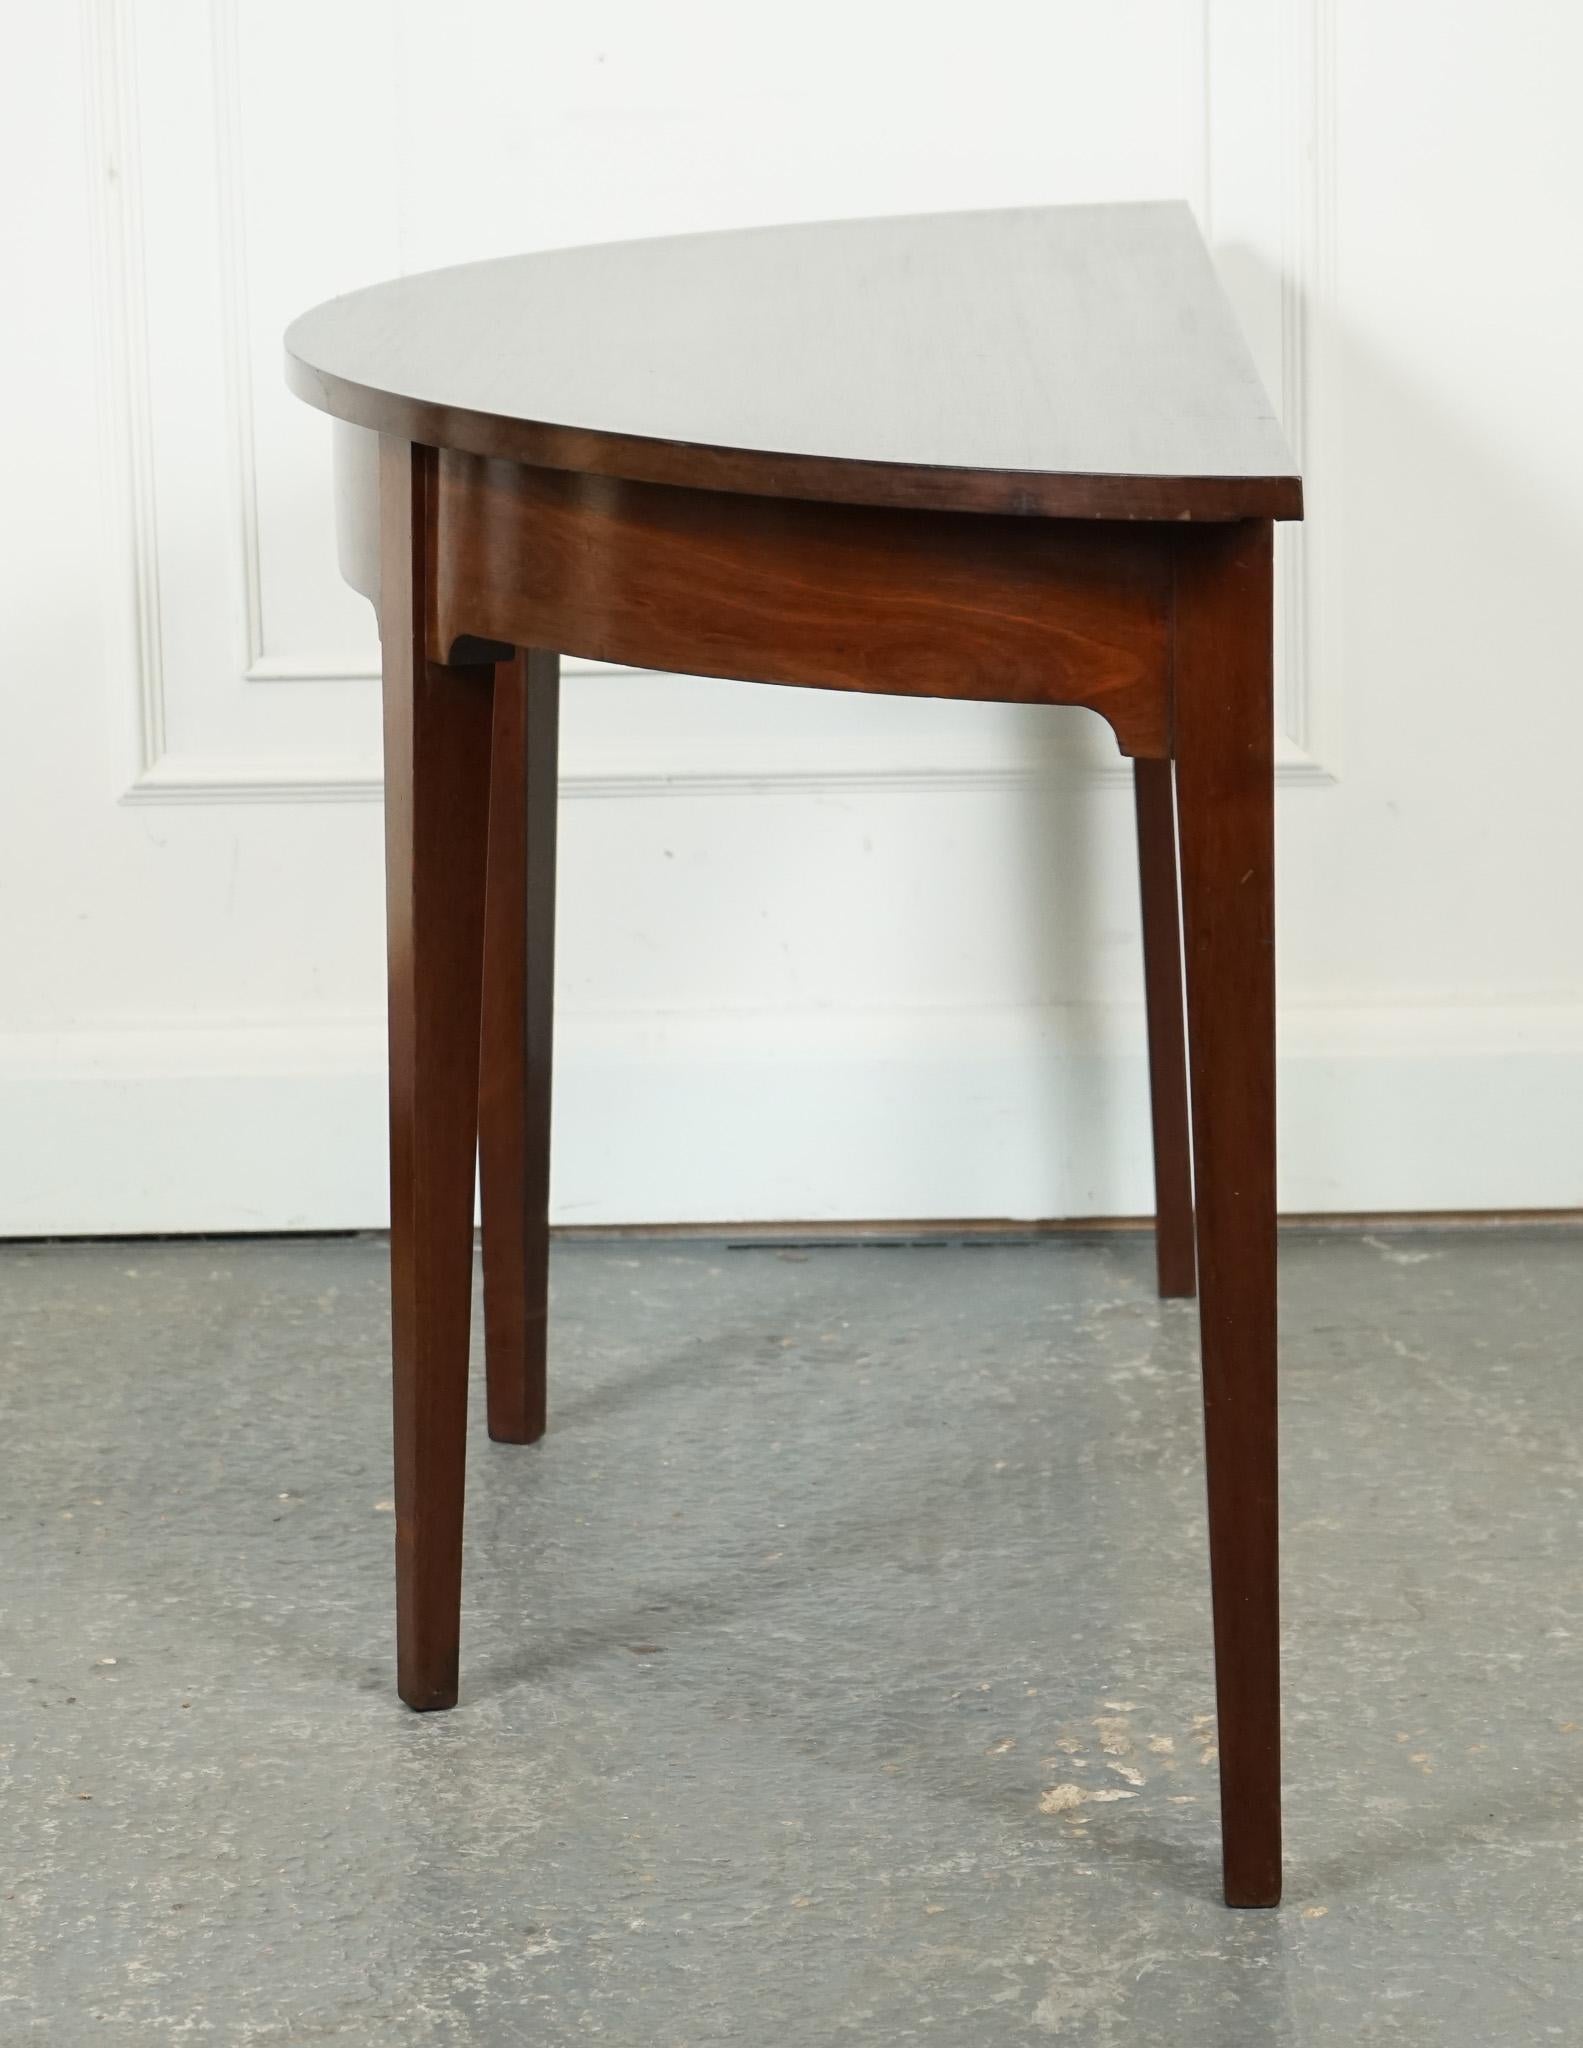 CIRCA 1800 GEORGE III DEMI LUNE HALL SiDE END TABLE J1 For Sale 1